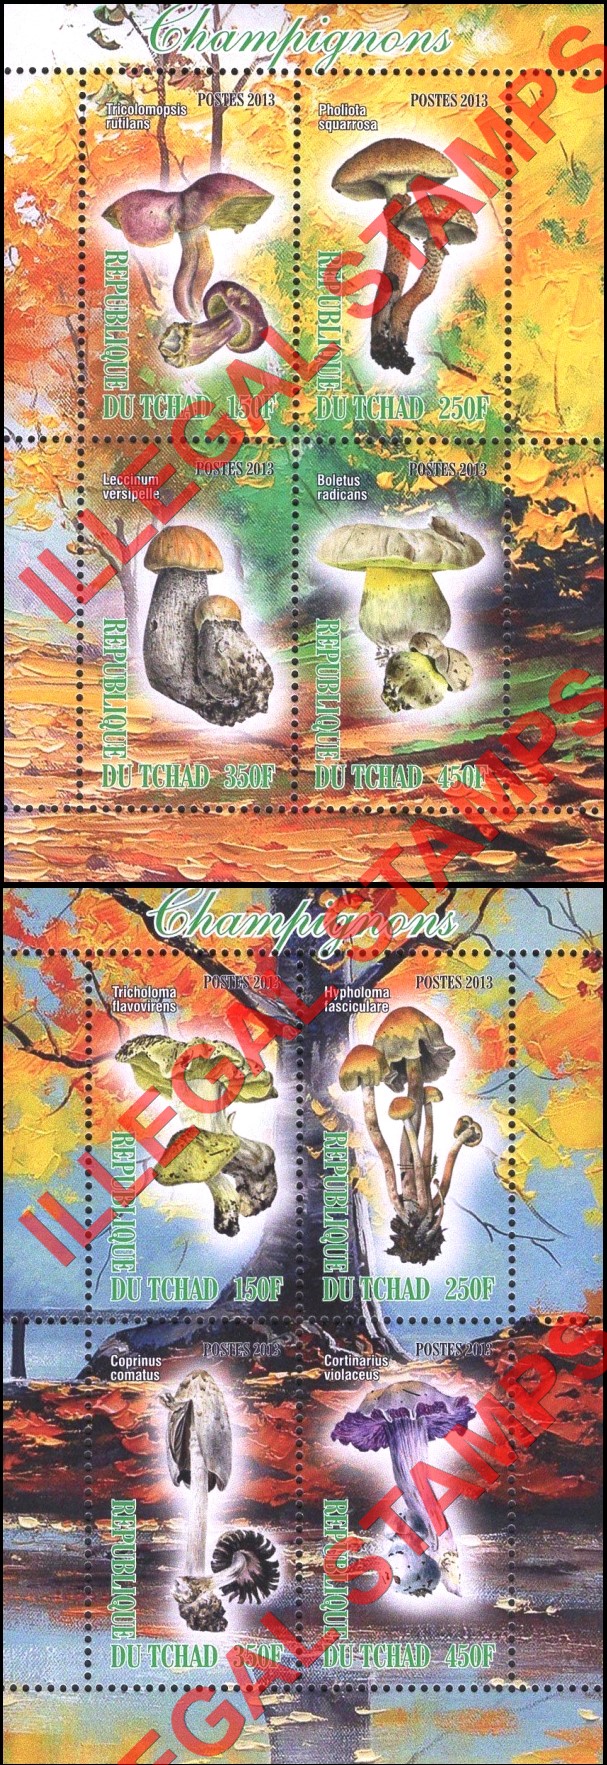 Chad 2013 Mushrooms Illegal Stamps in Souvenir Sheets of 4 (Part 2)